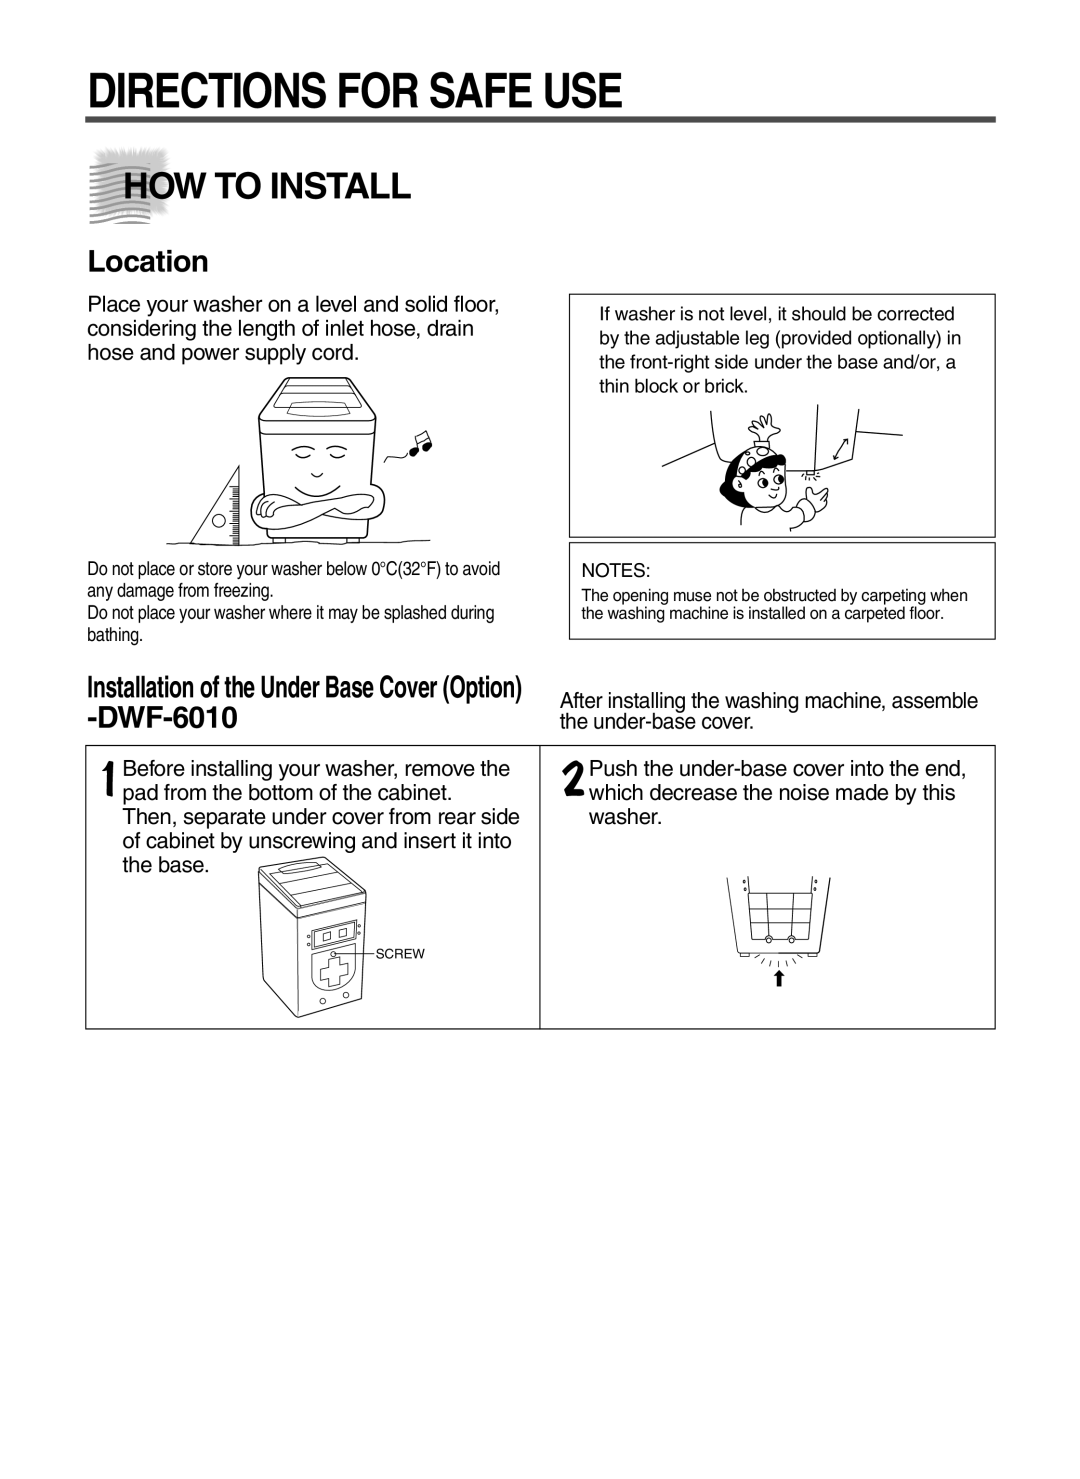 Daewoo DWF-6010 instruction manual Directions For Safe, How To Install, Location 